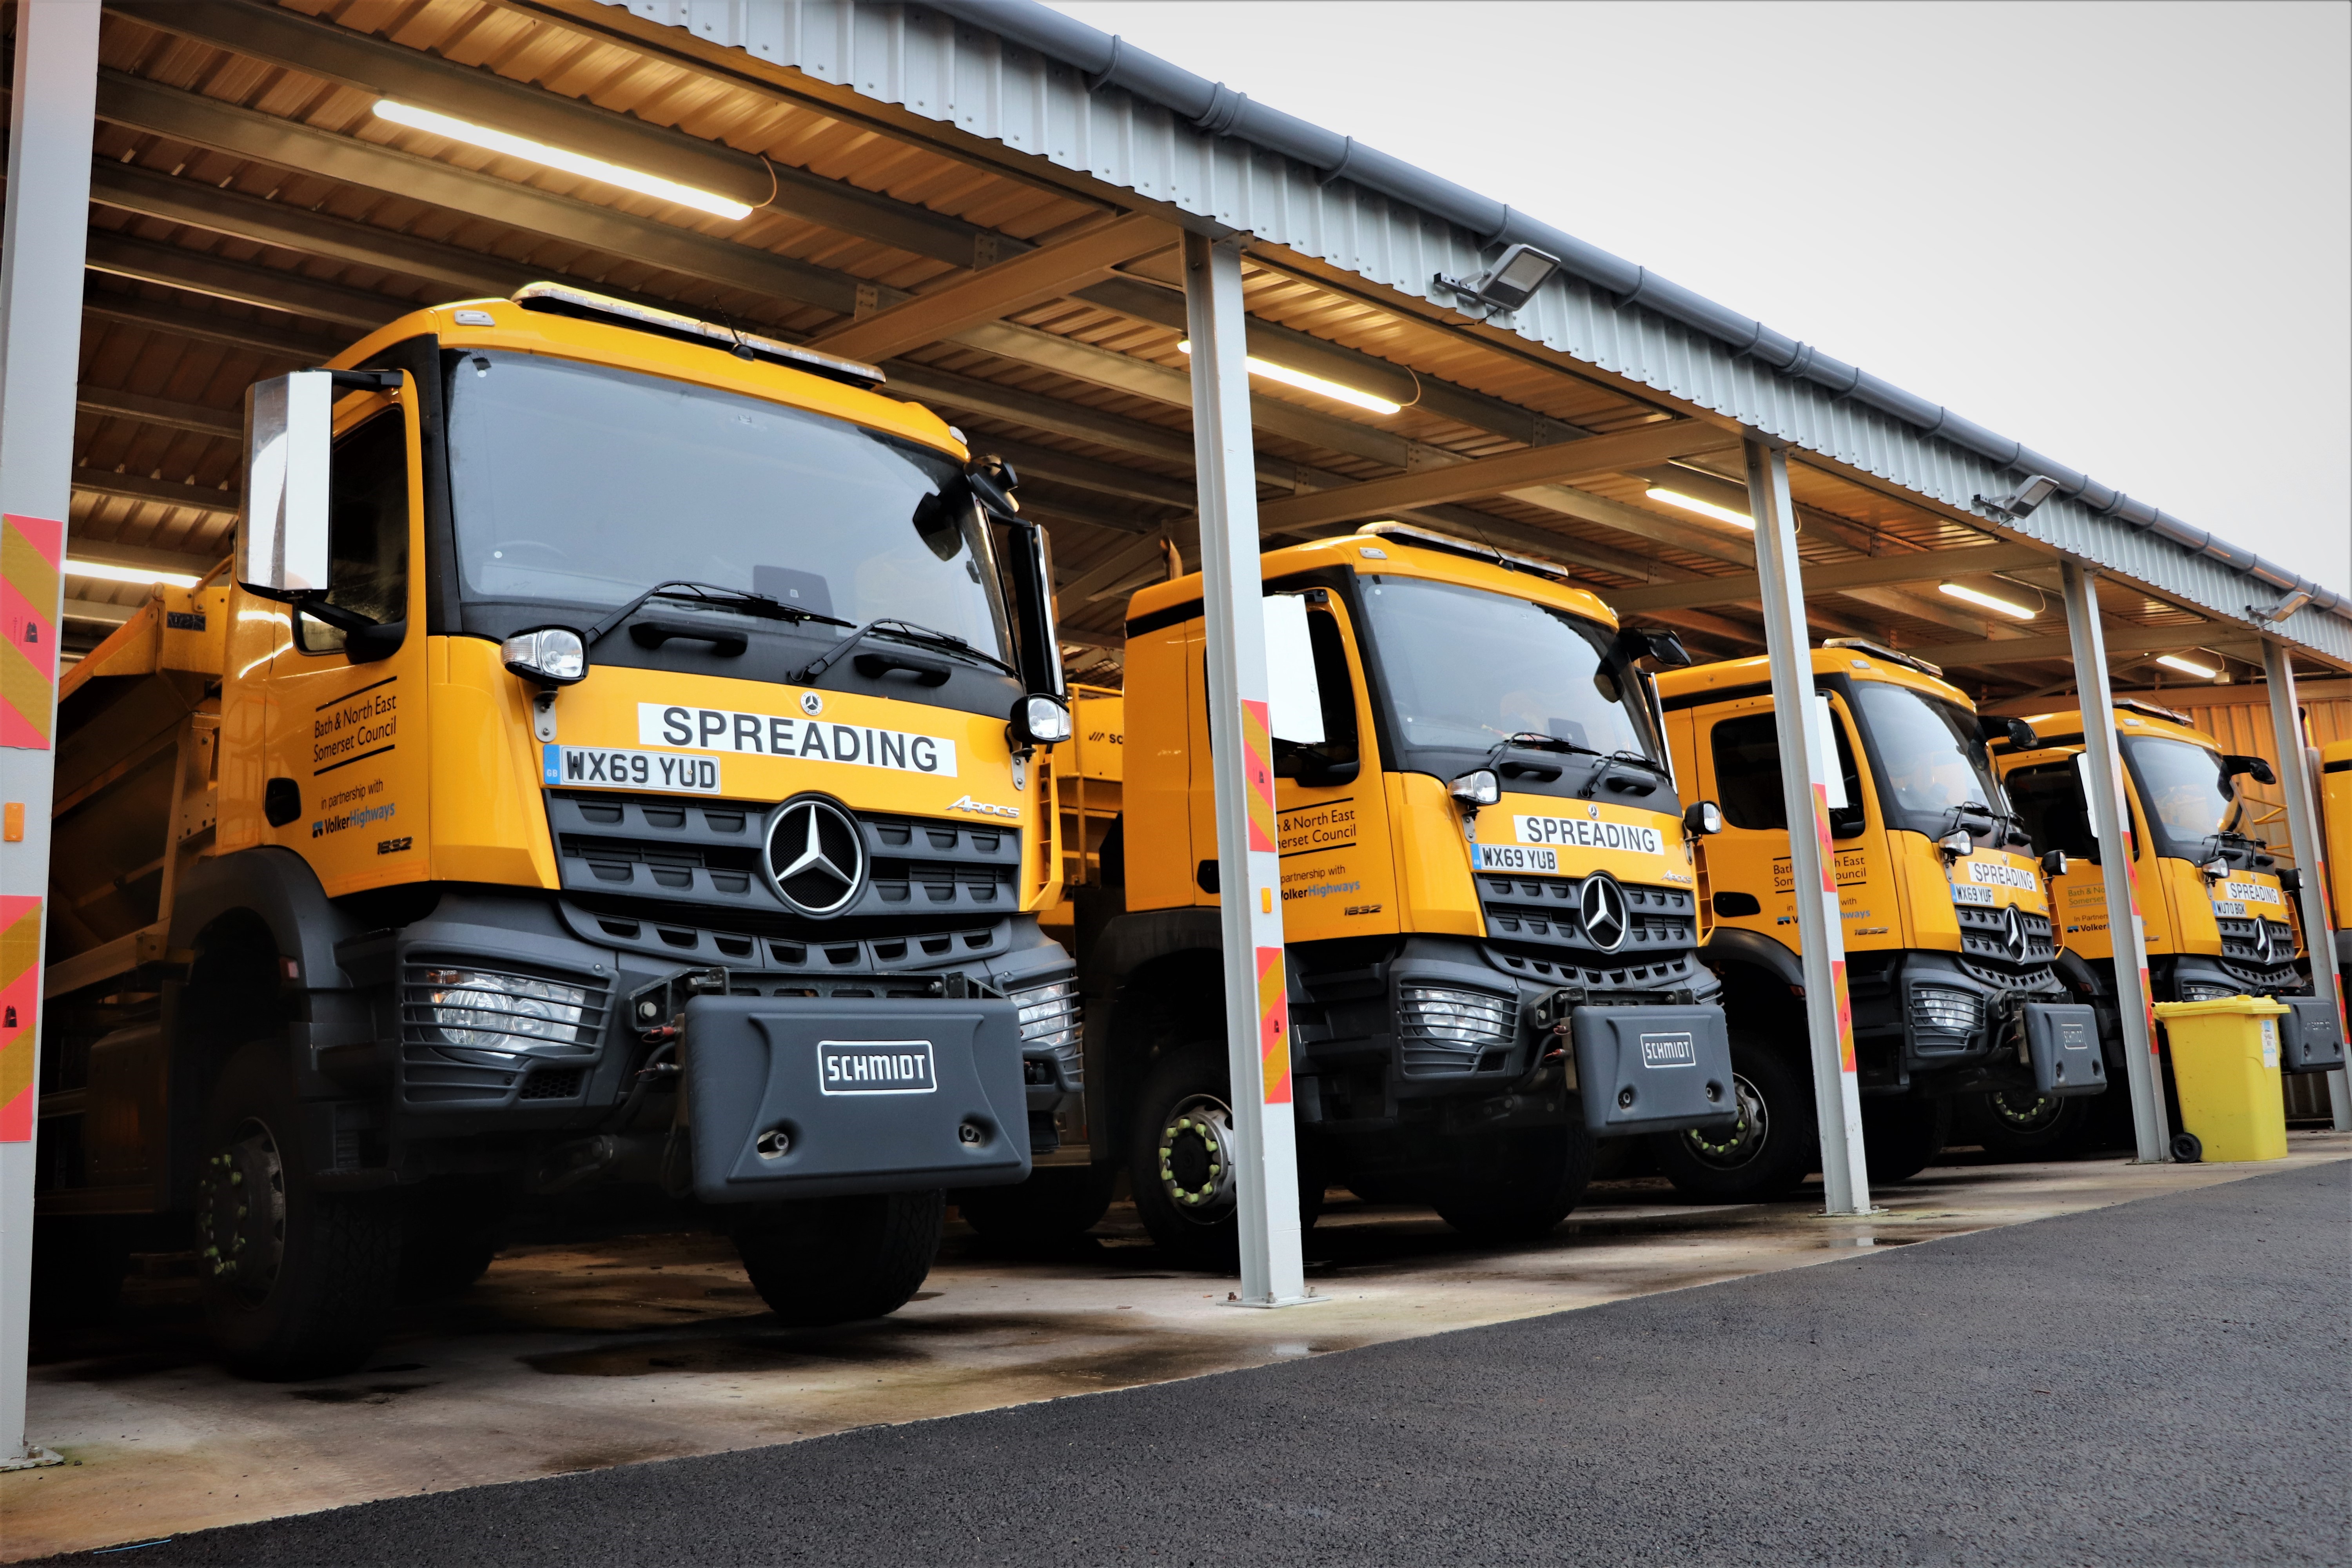 gritting lorries lined up ready for winter